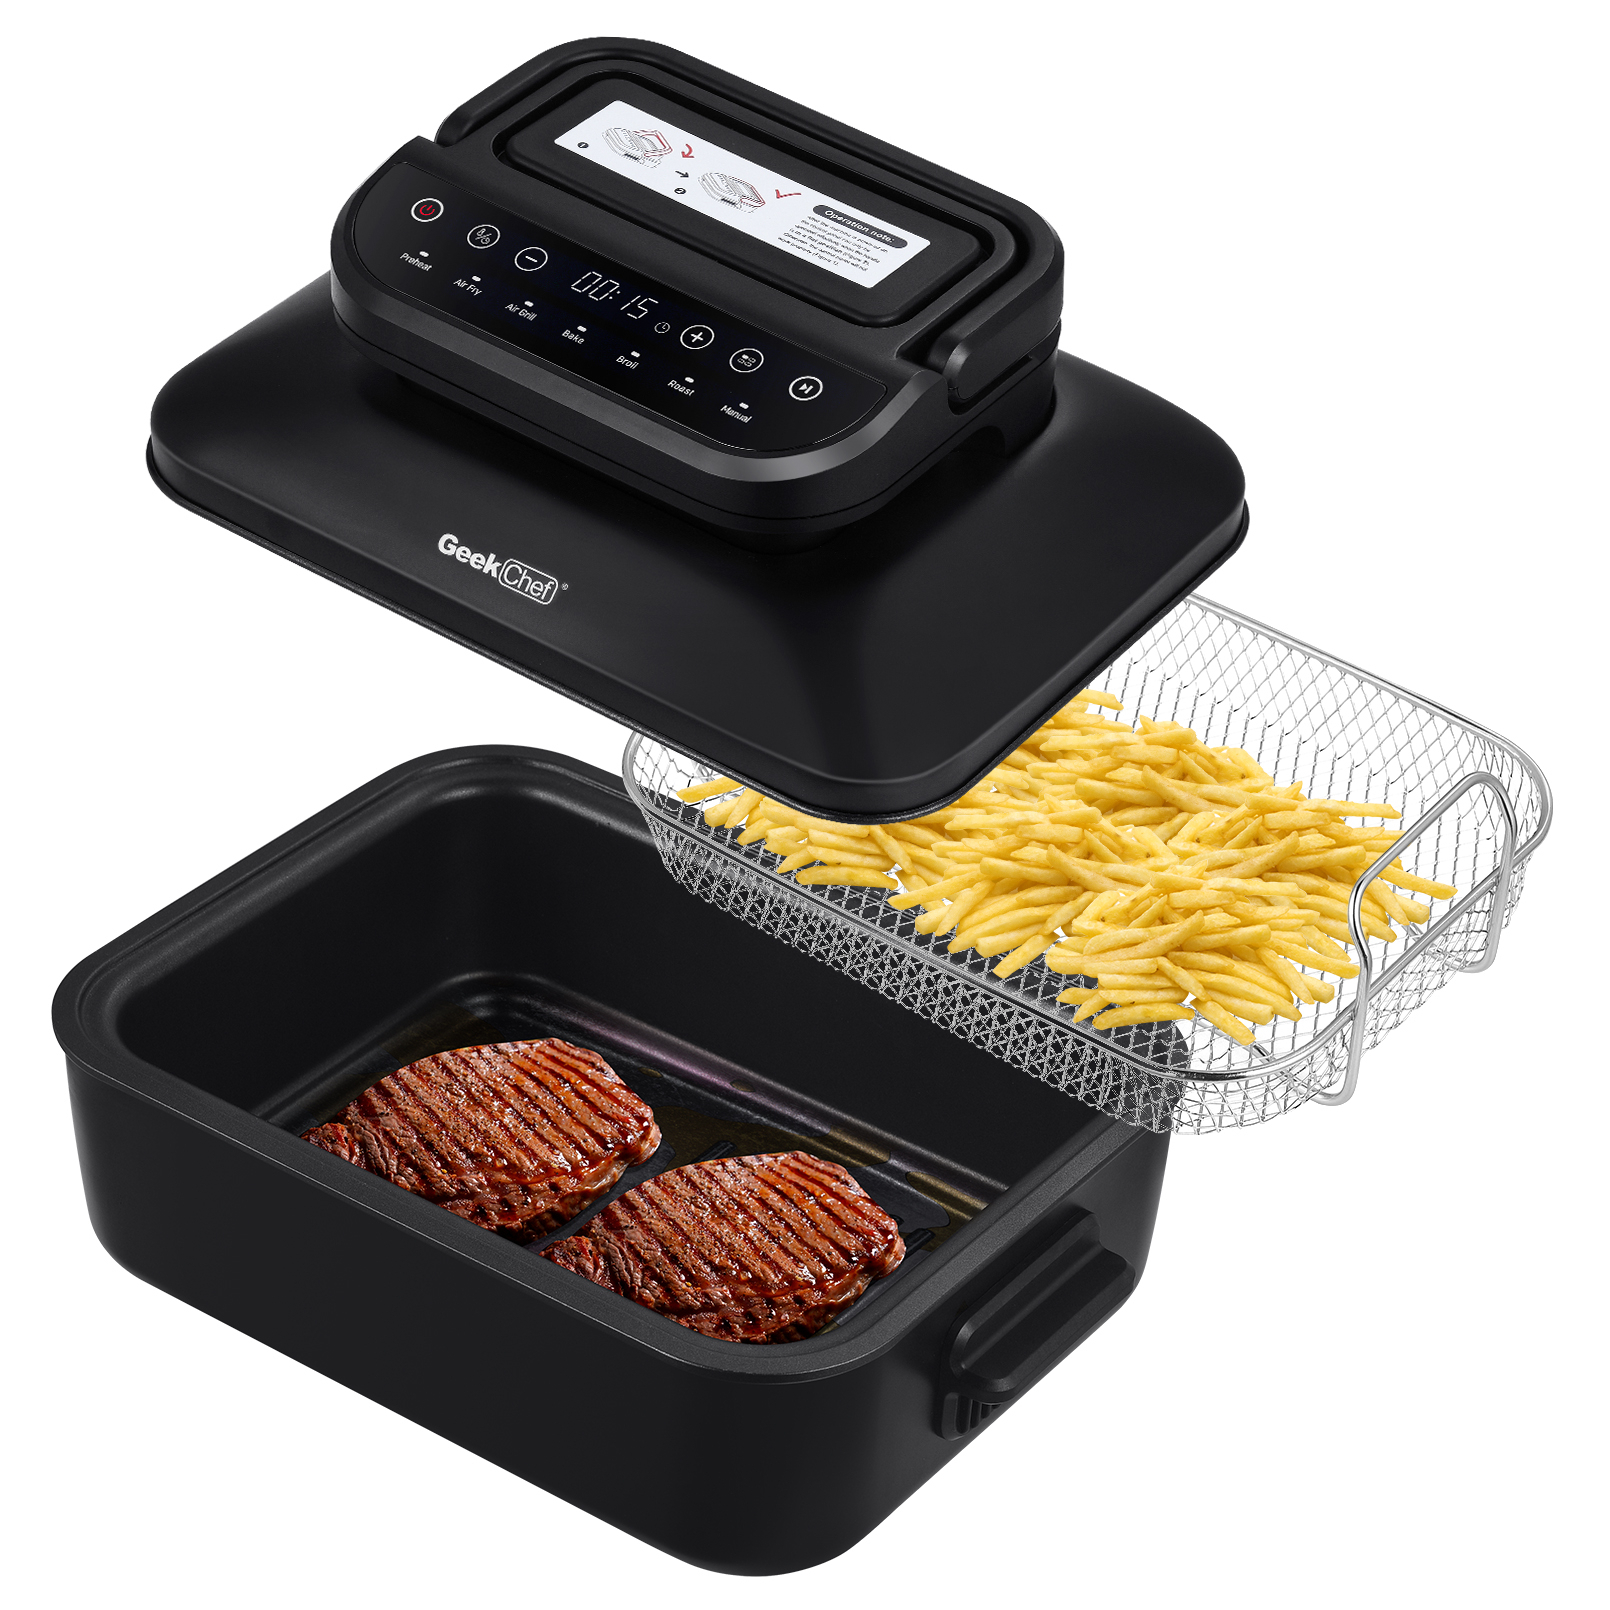 7 In 1 Smokeless Electric Indoor Grill with Air Fry Roast Bake Indoor Tabletop Grill & Griddle with Preset Function